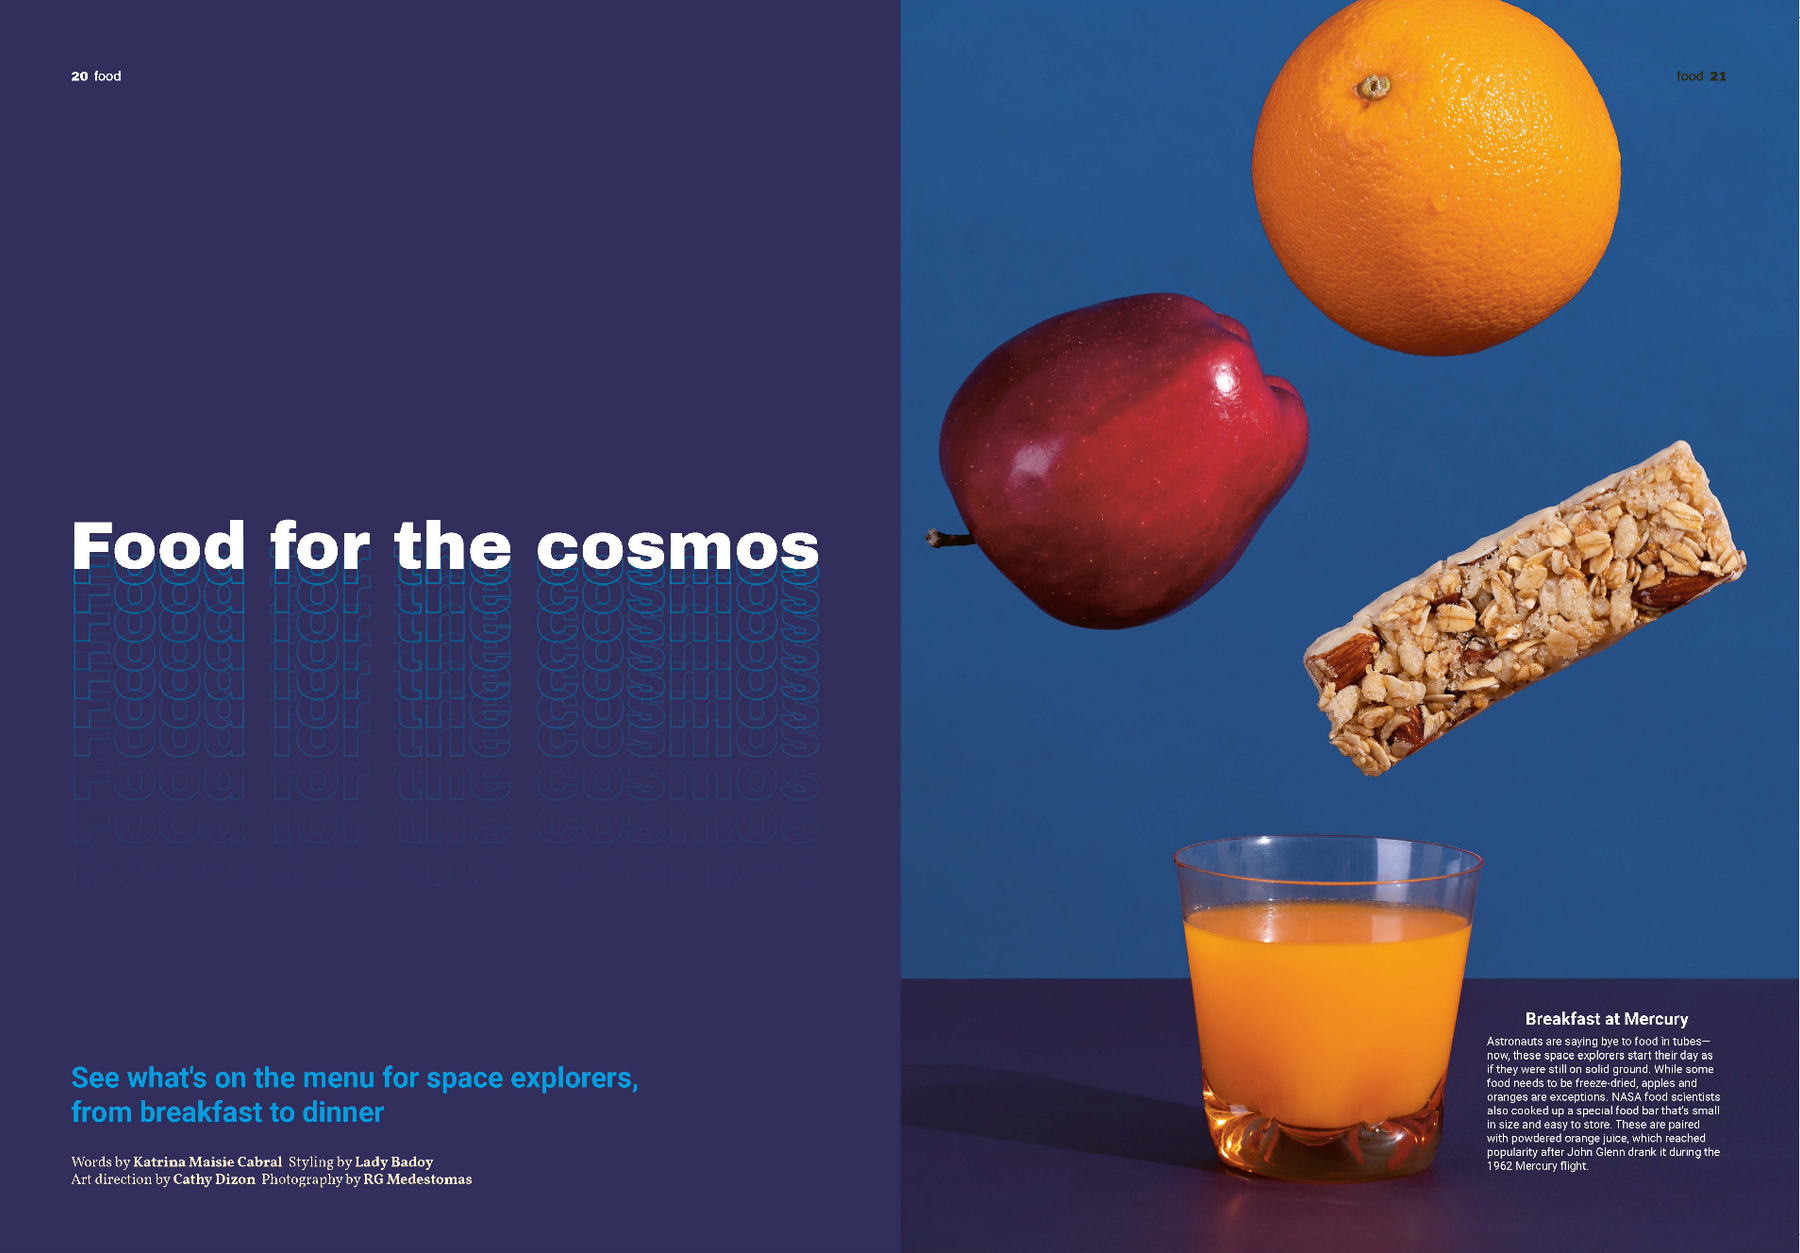 An apple, orange, and granola bar float over a glass of orange juice. On the lefthand page, it reads the article title Food for the Cosmos with a subheader, See what's on the menu for space explorers, from breakfast to dinner. The names of the contributors are below (Katrina Maisie Cabral, Lady Badoy, RG Medestomas)